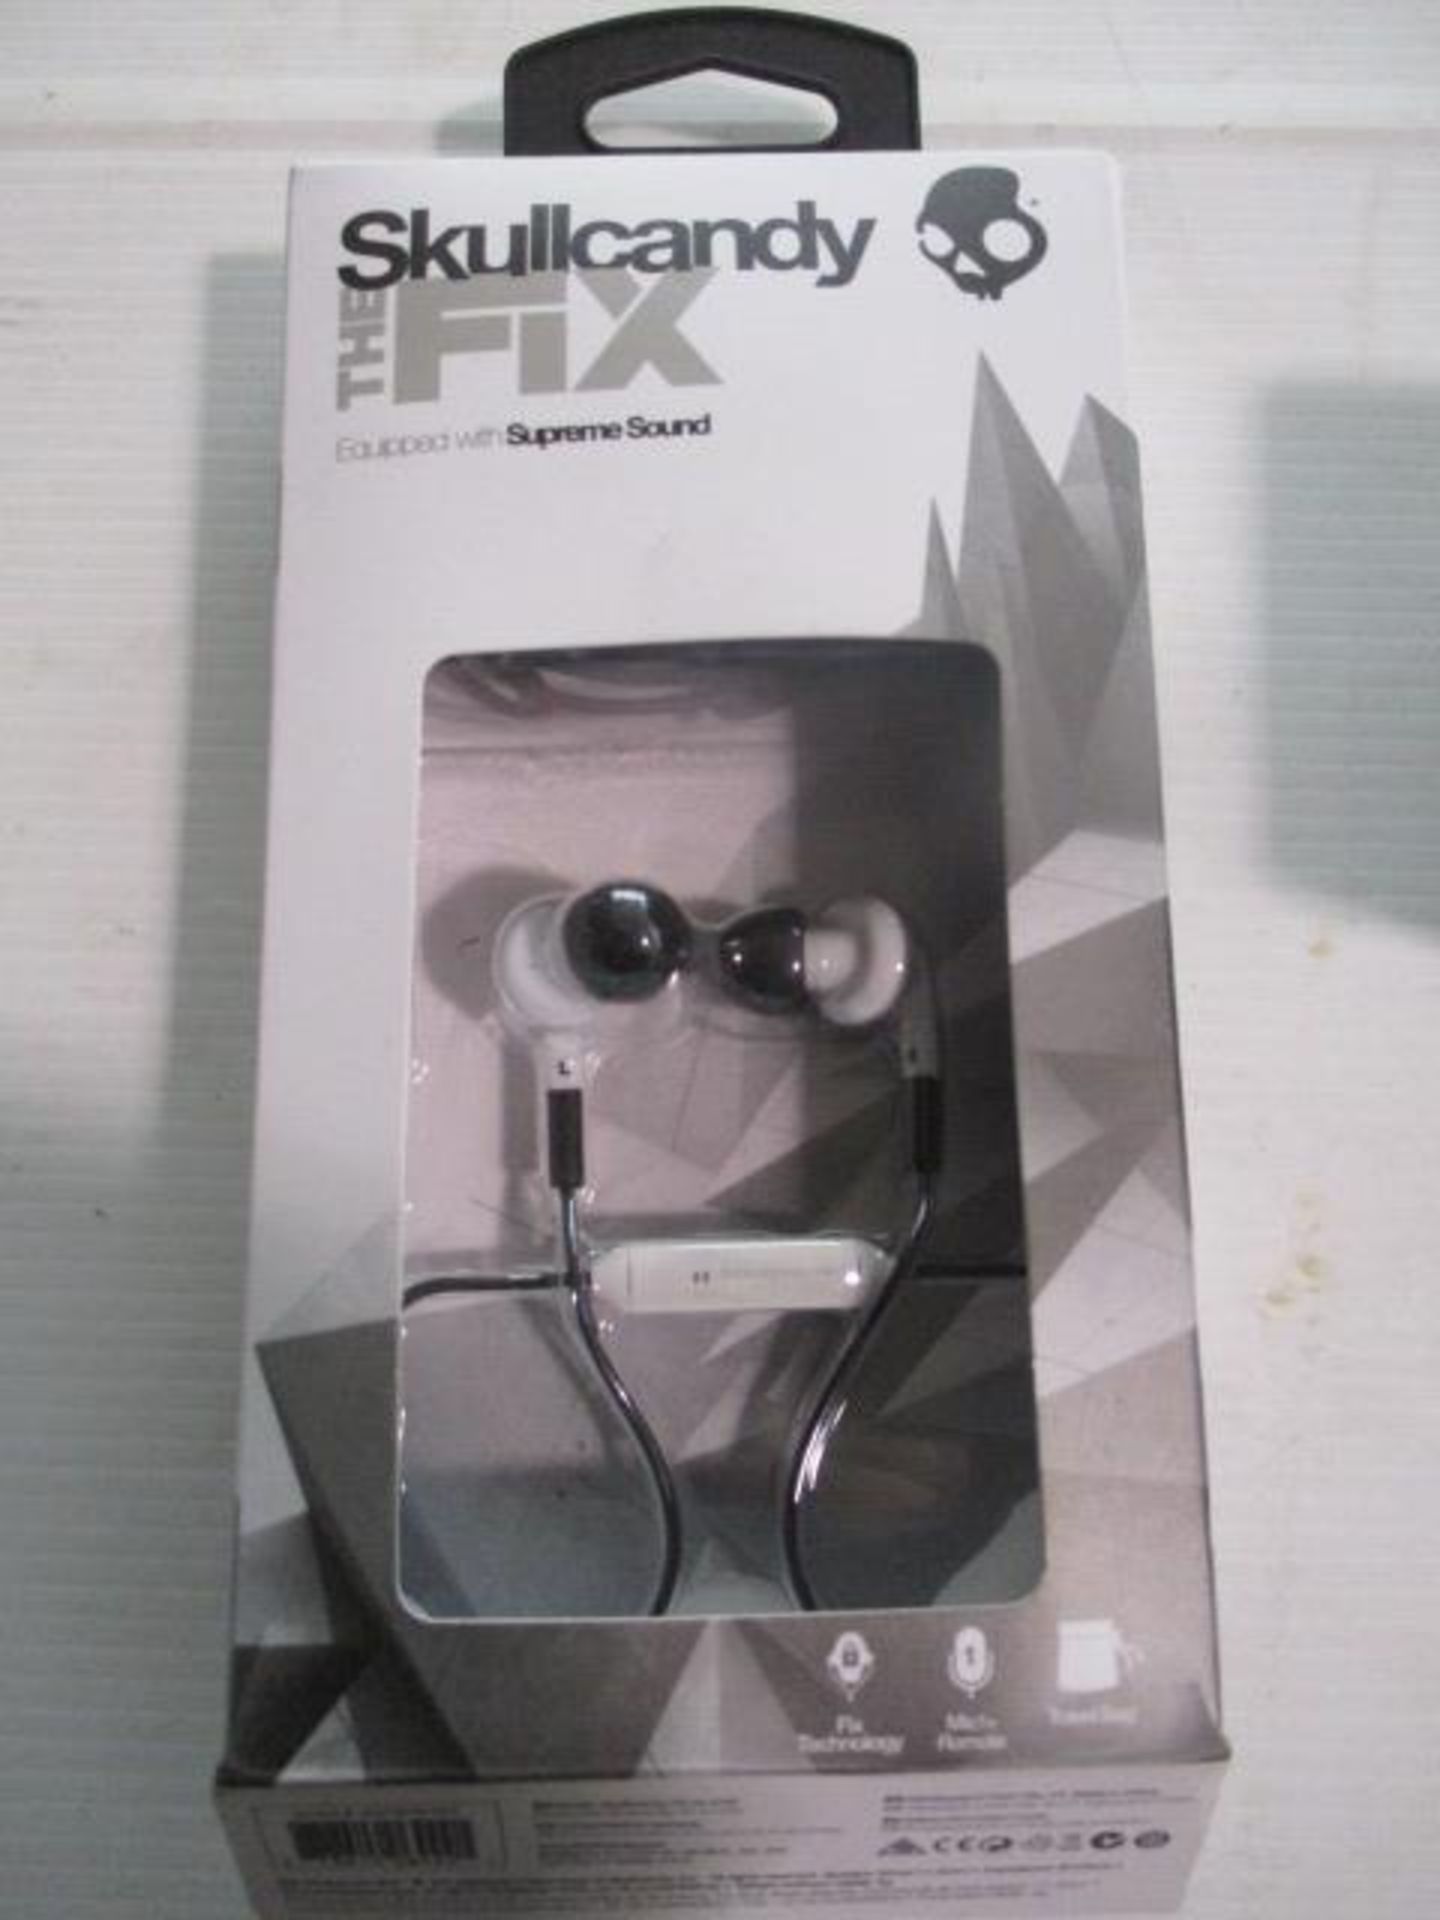 SkullCandy Headfones boxed and unchecked as pictured